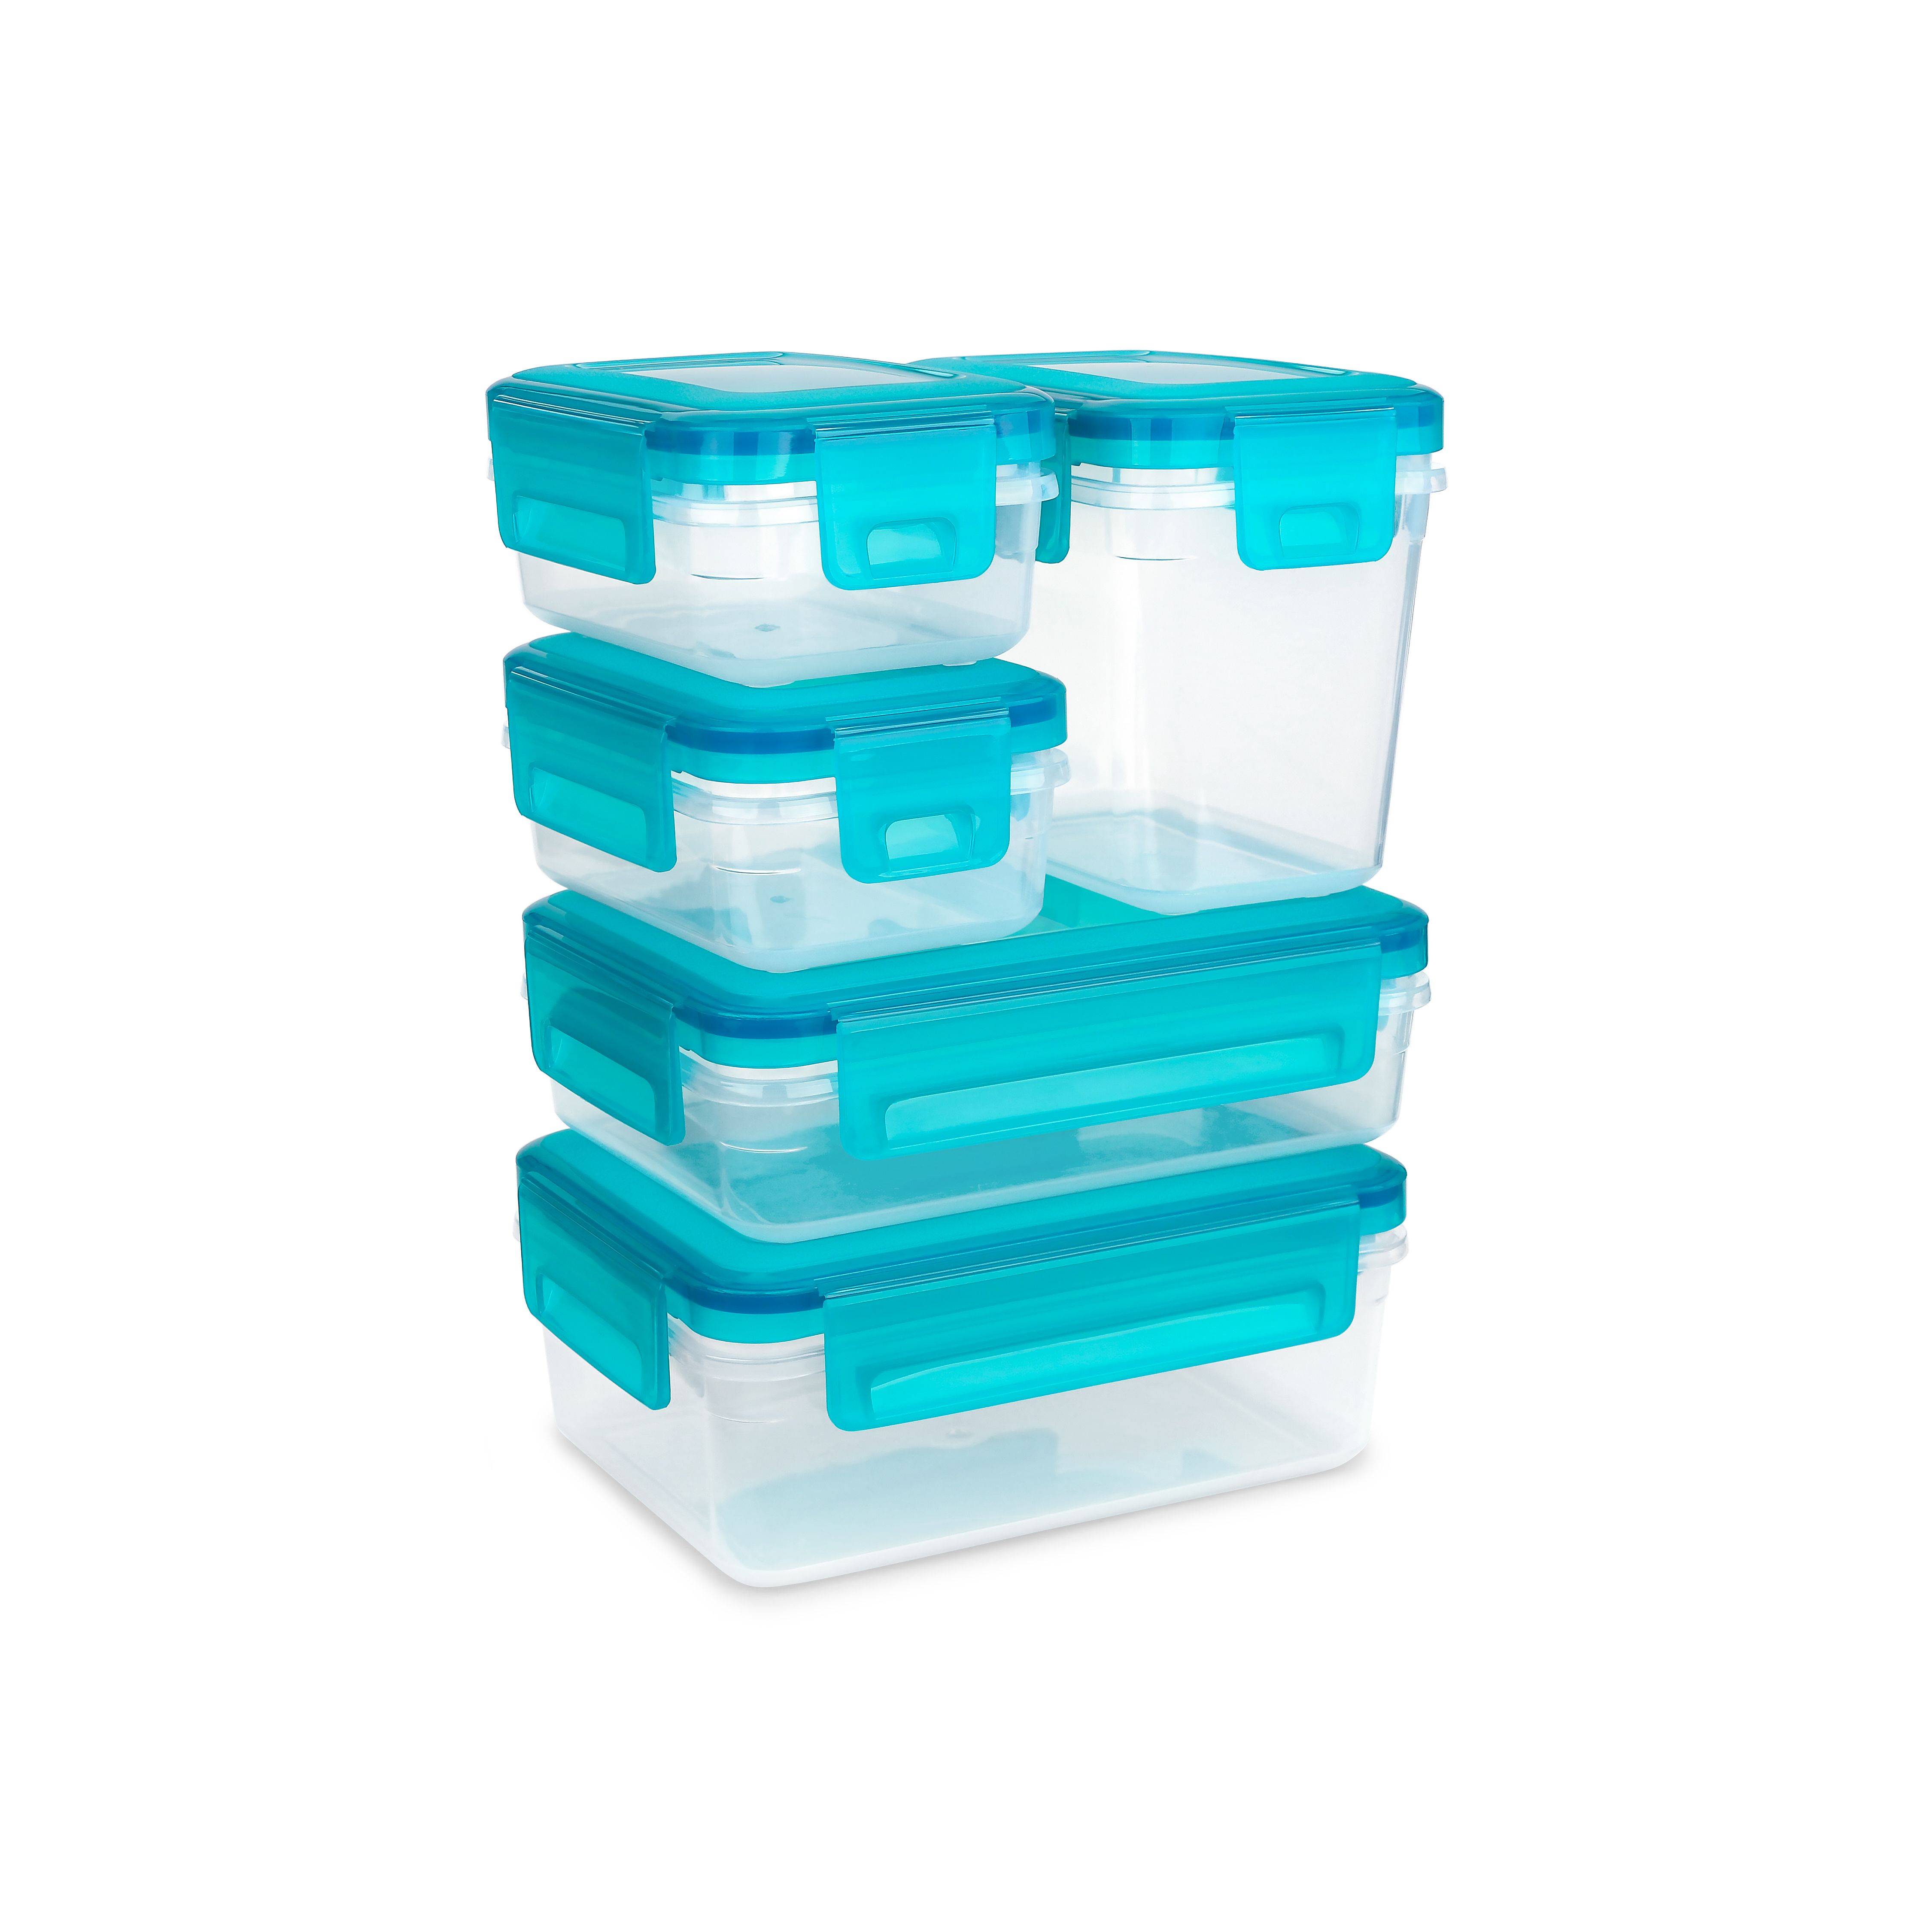 Keep & Care Food Containers